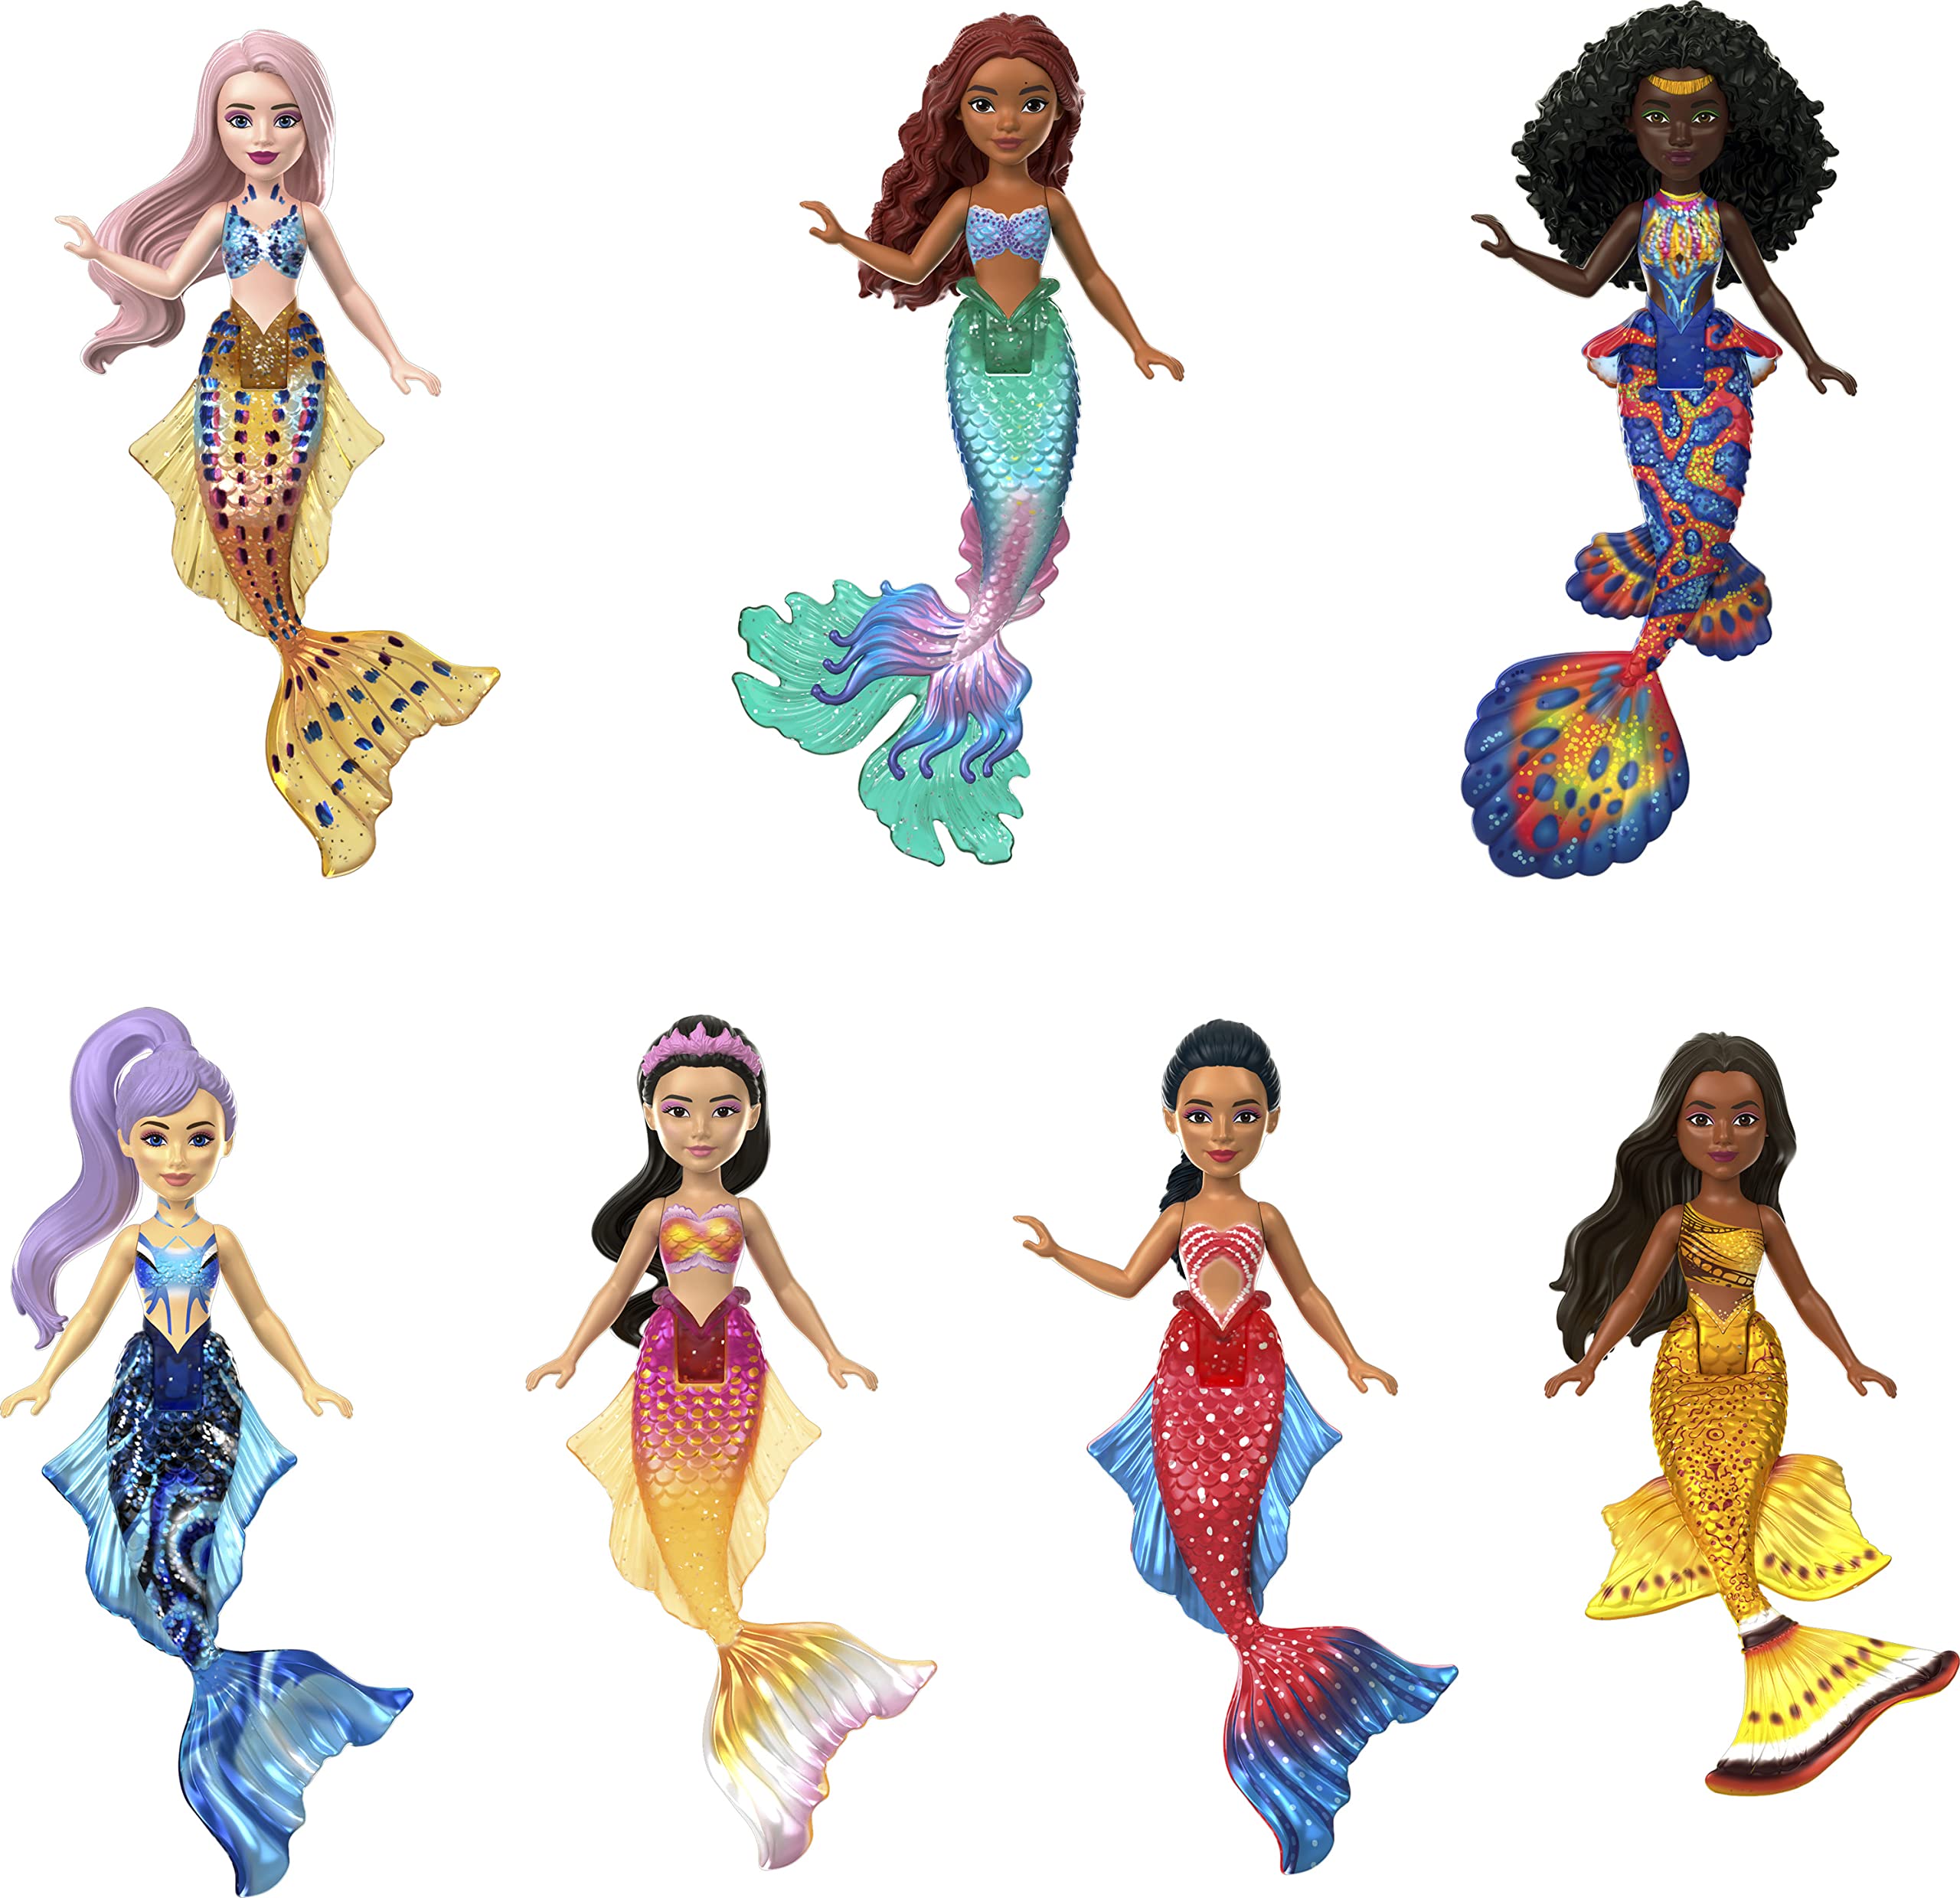 Mattel Disney The Little Mermaid Ariel and Sisters Small Doll Set, Collection of 7 Mermaid Dolls, Toys Inspired by the Movie